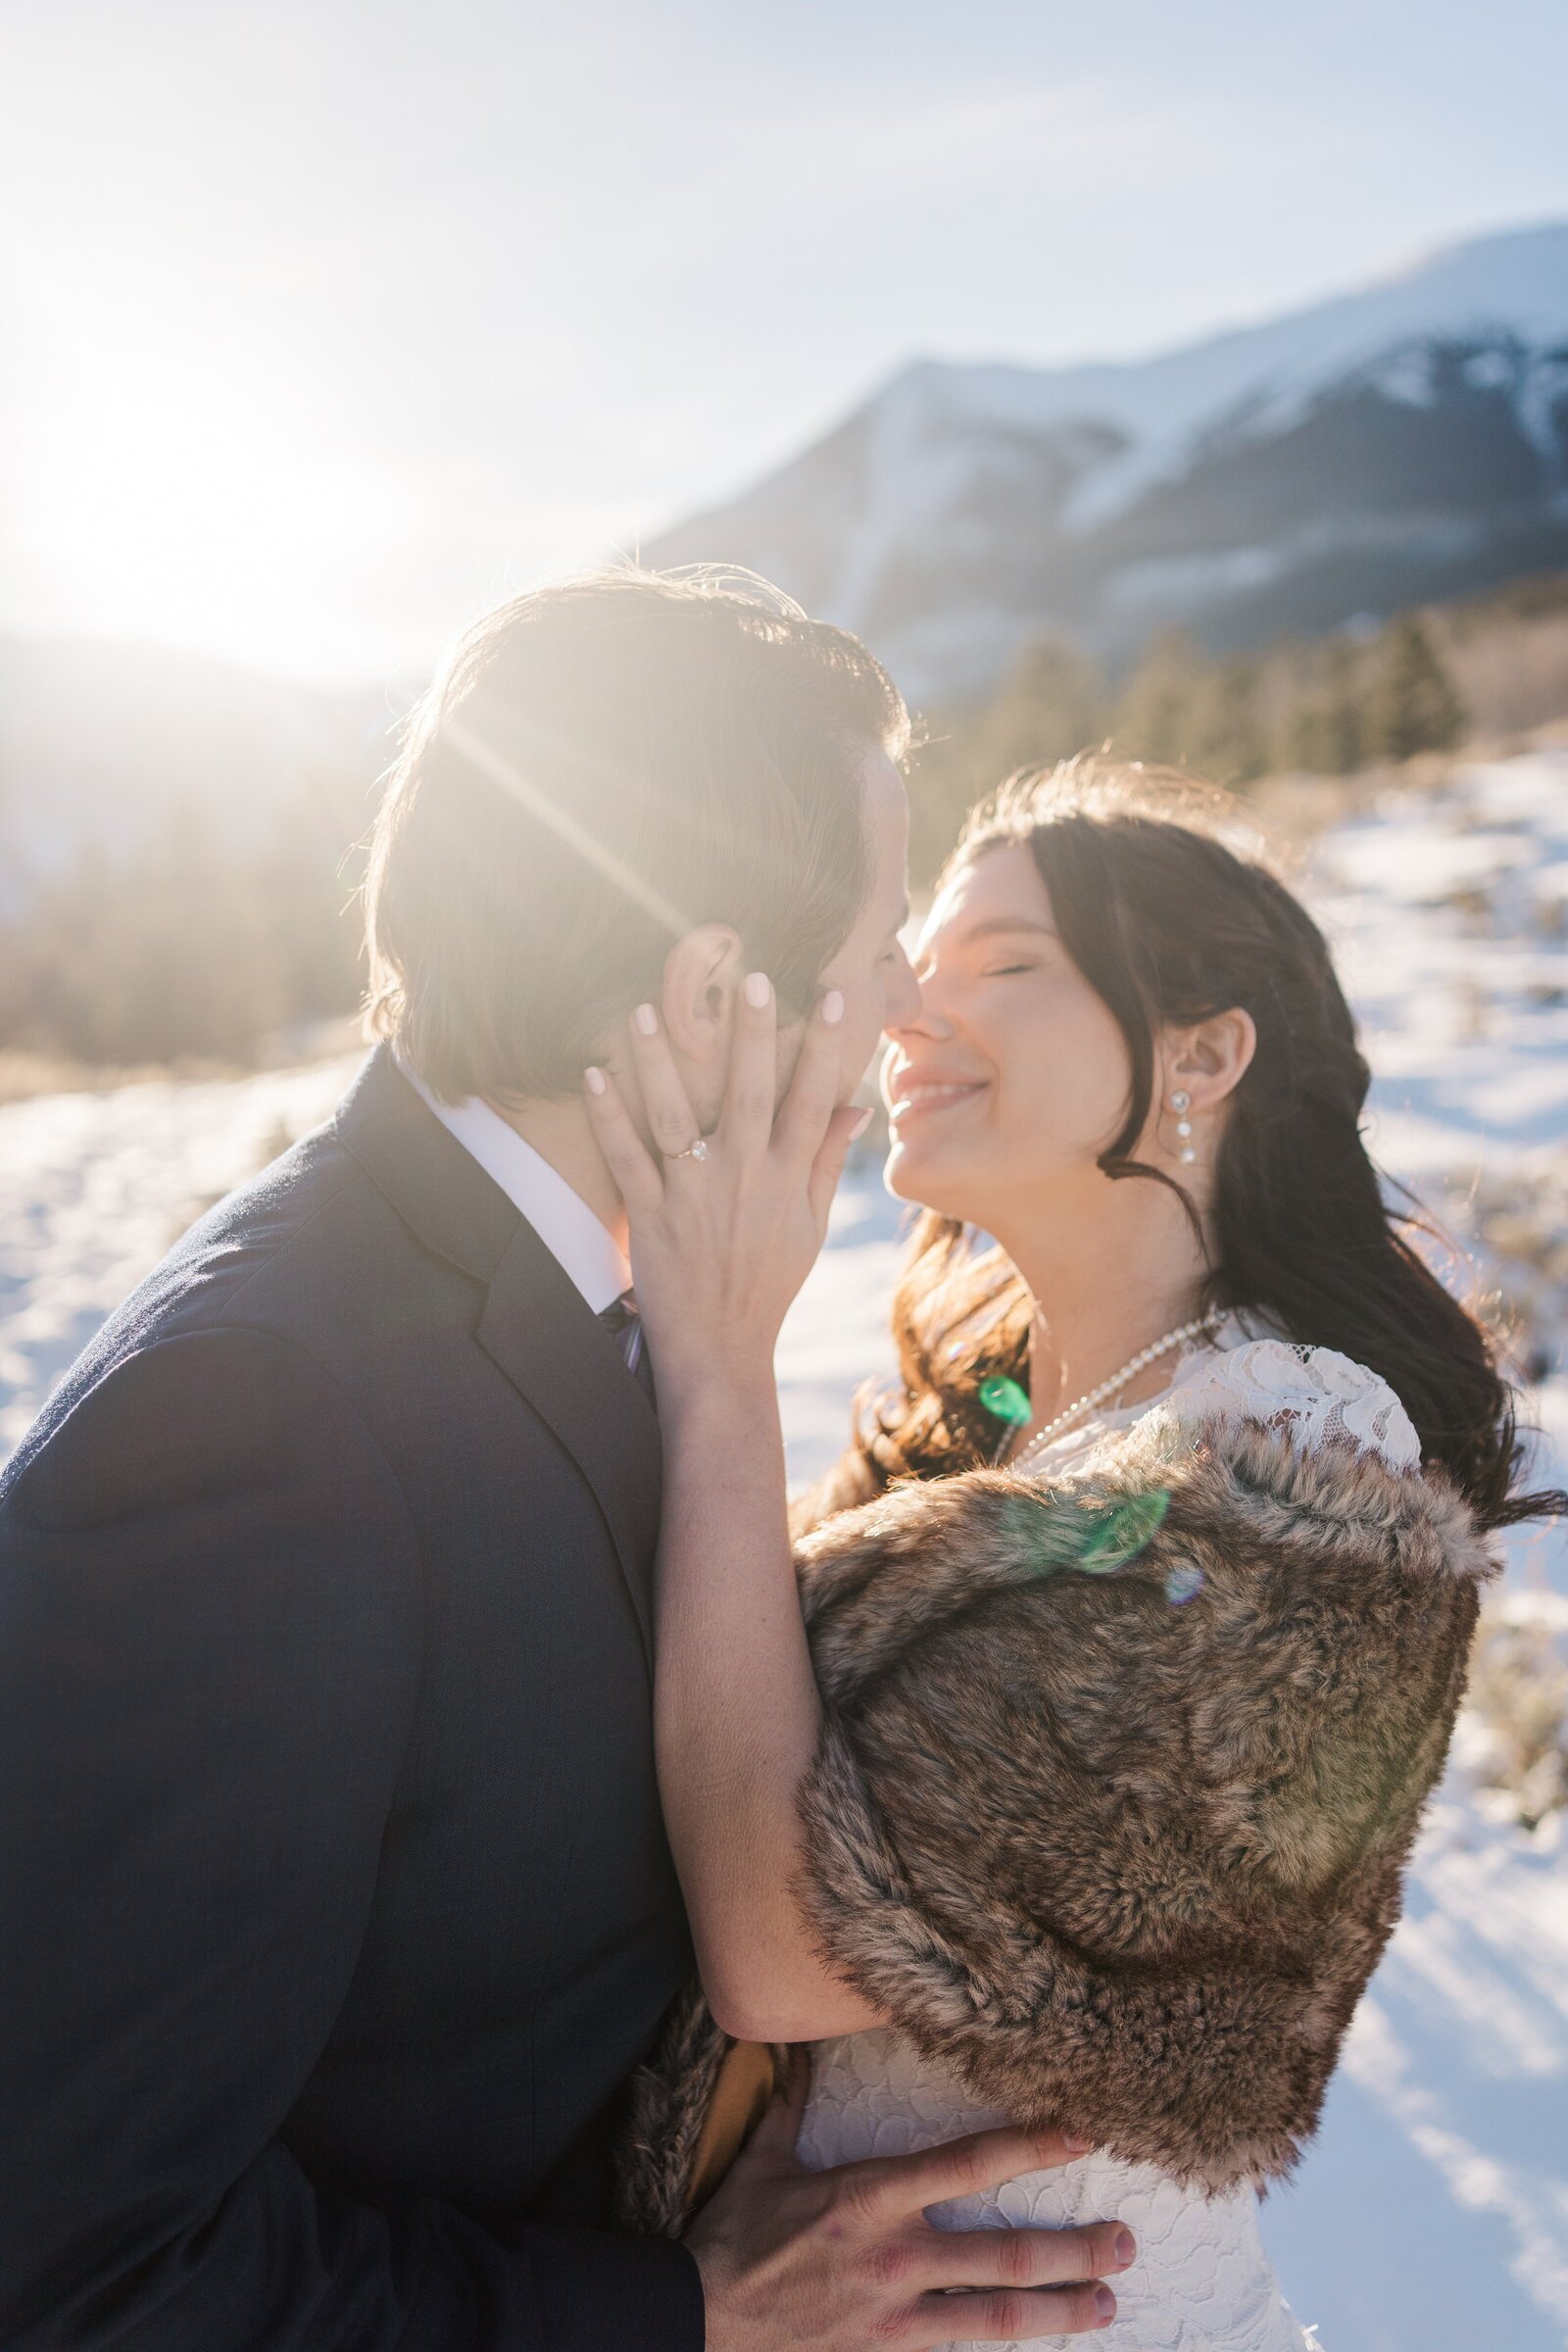 Let Samantha Immer document your love story with a personalized and intimate Colorado engagement session. With a passion for adventure and storytelling, she will capture the authentic moments that make your relationship special.